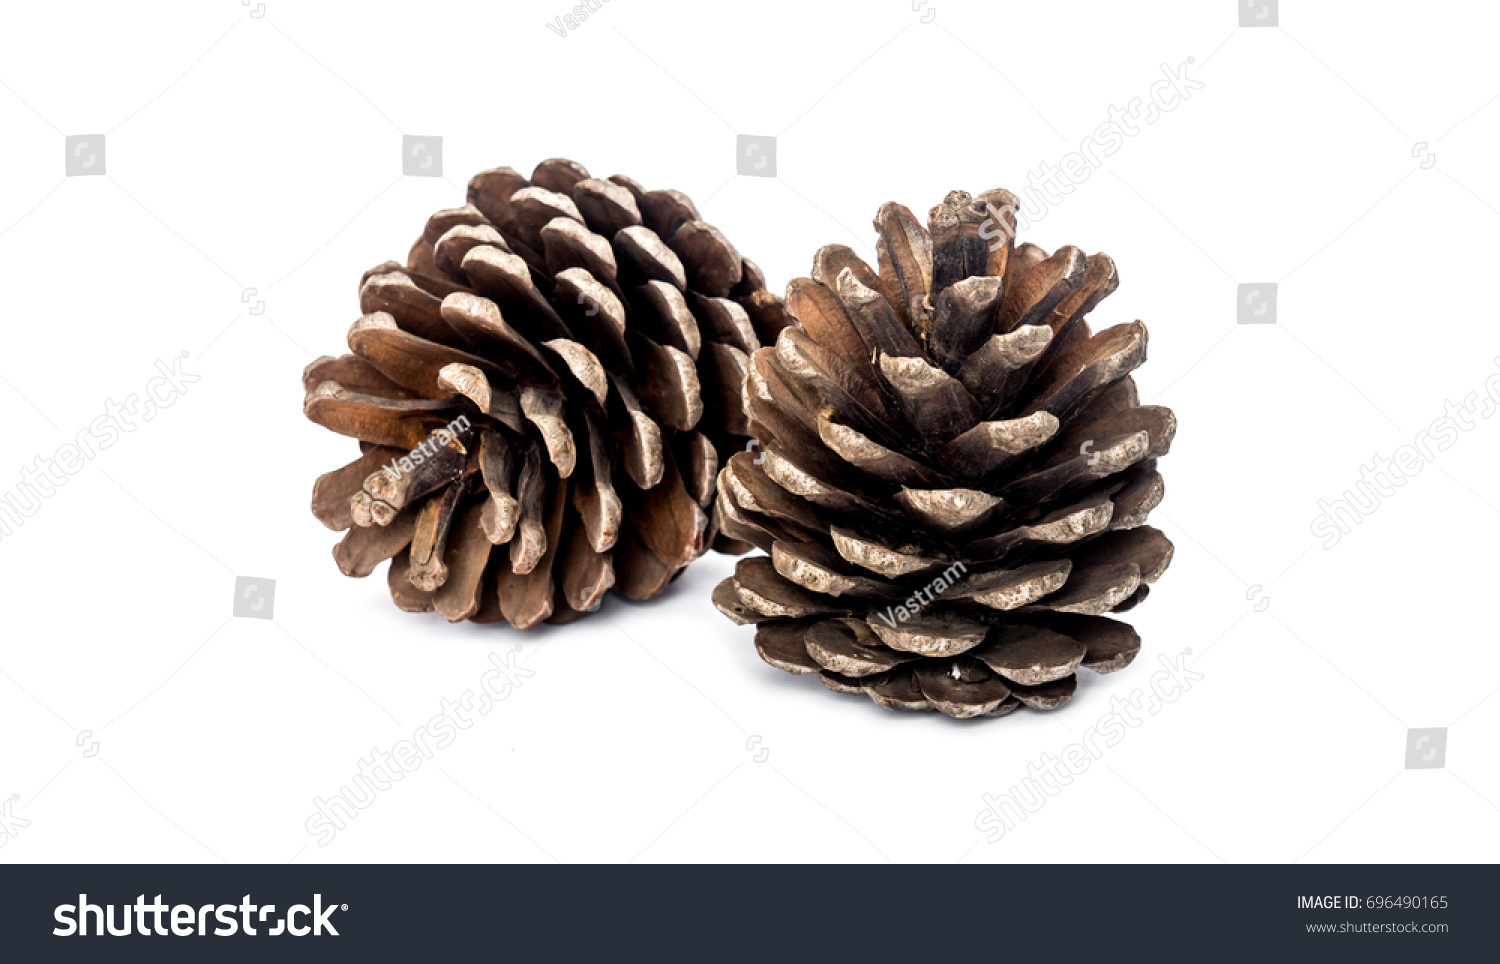 Pine cone on white background #696490165